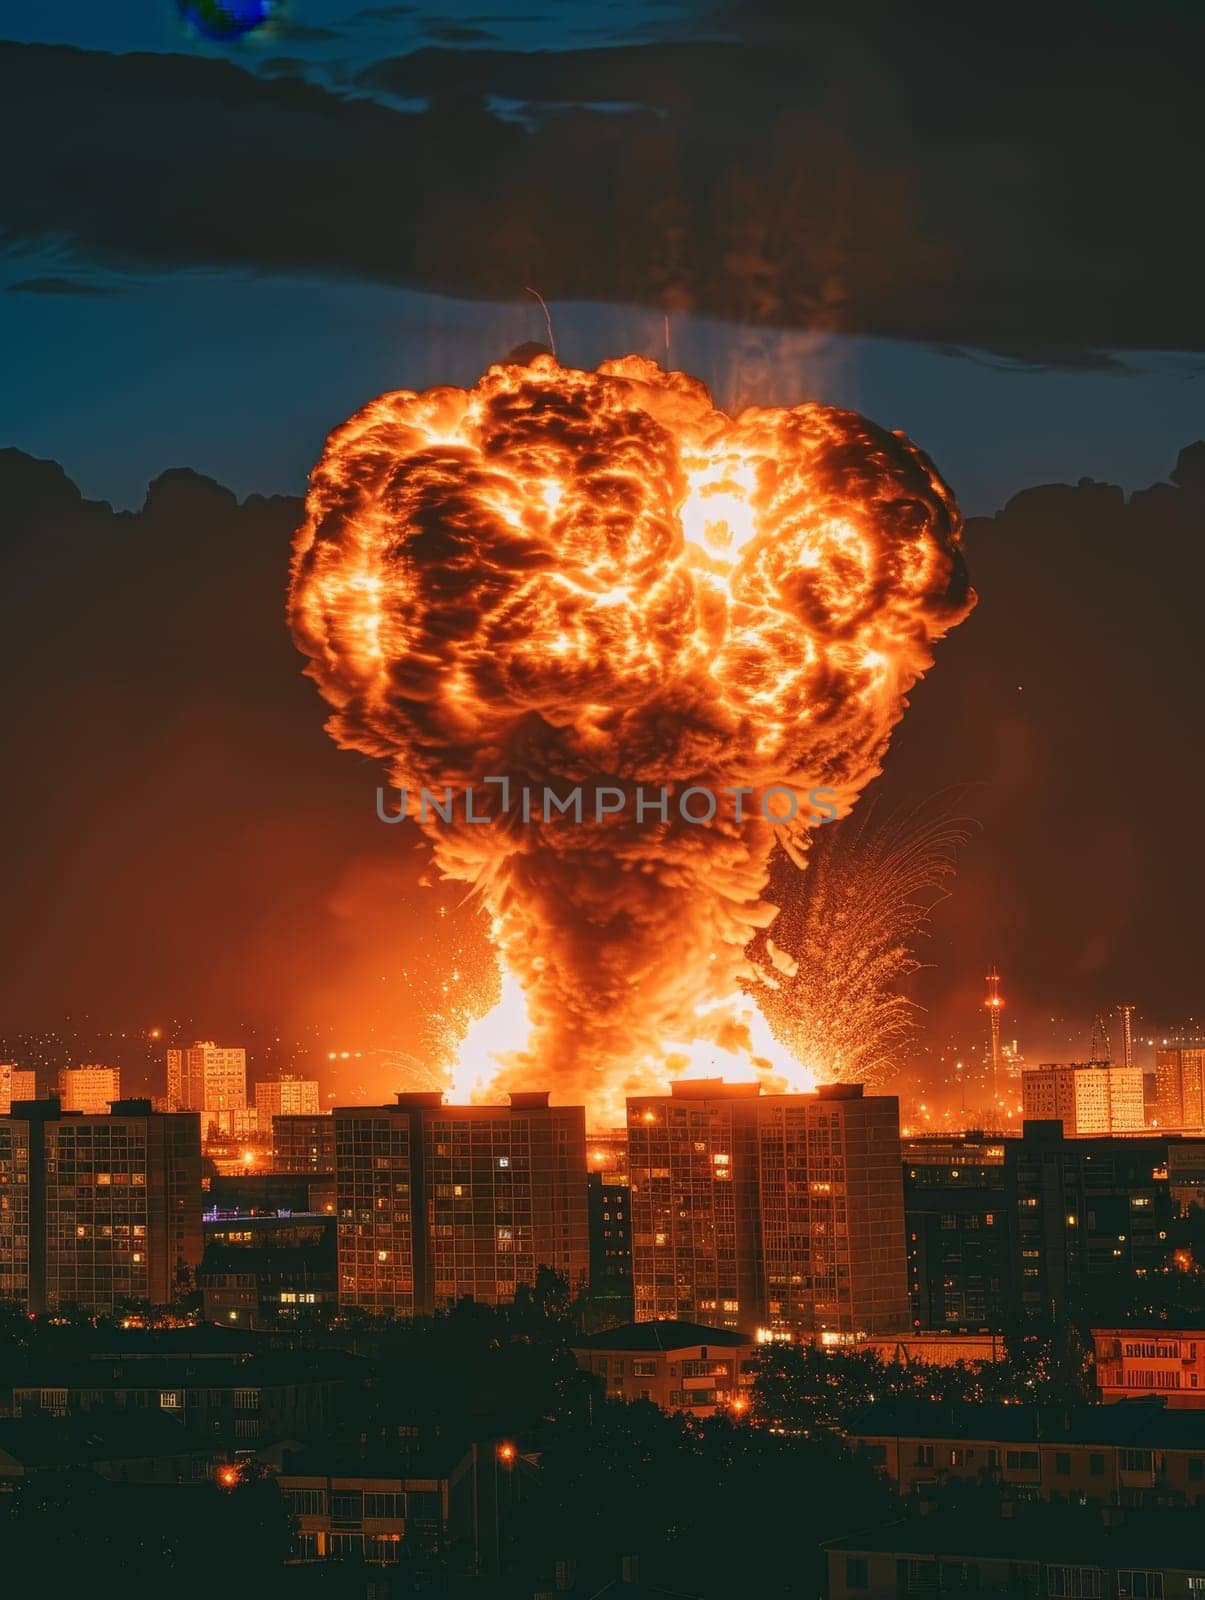 An explosion erupts in an urban environment at dusk, the fiery glow casting a haunting light over the city buildings, suggesting urgency and danger.. by sfinks